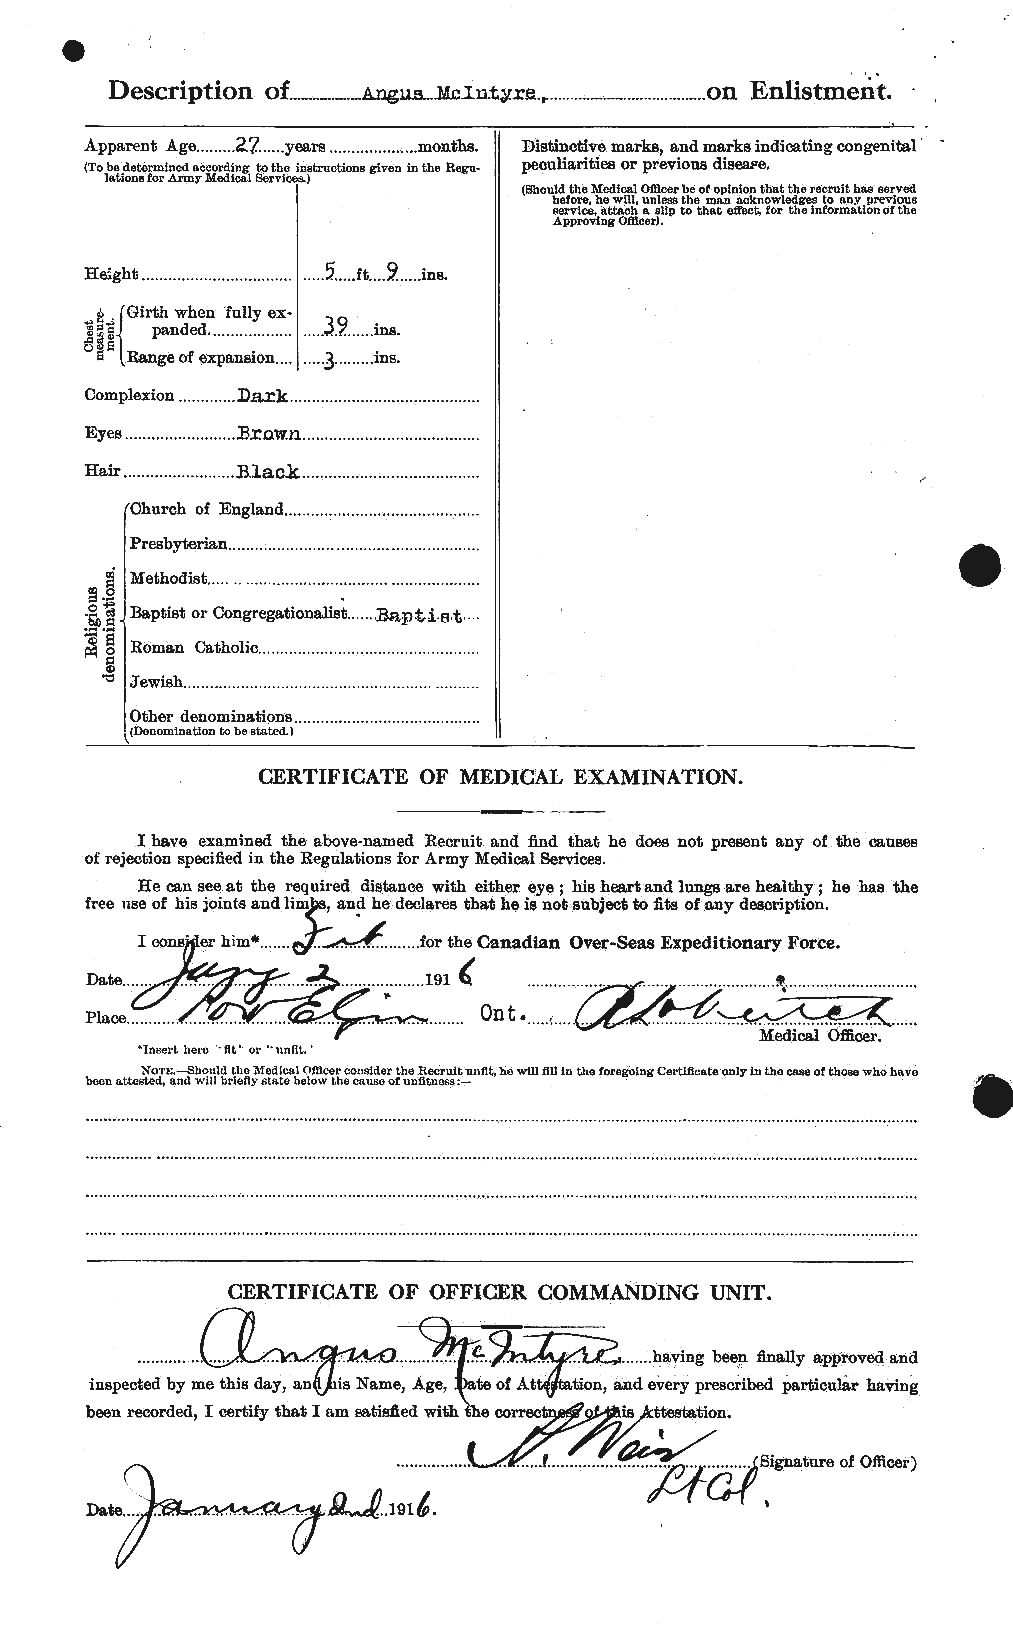 Personnel Records of the First World War - CEF 525868b